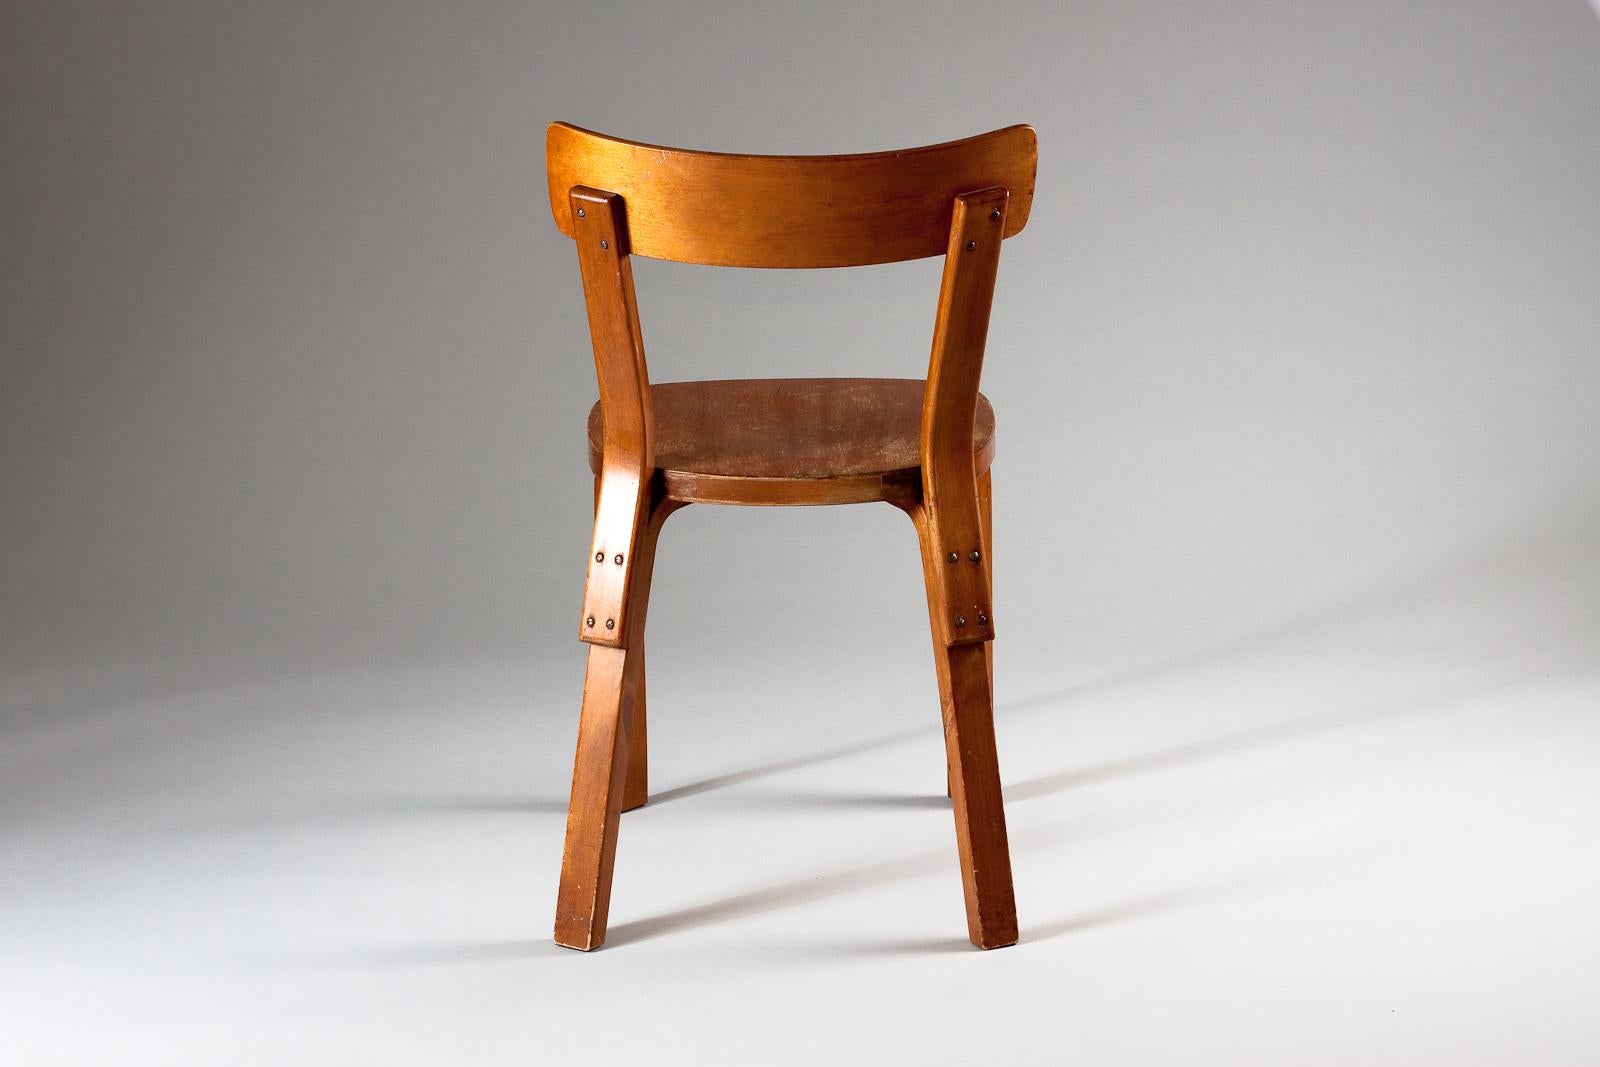 Alvar Aalto, Original 1930s Chair 69 with Great Colour and Patina In Good Condition For Sale In Turku, Varsinais-Suomi